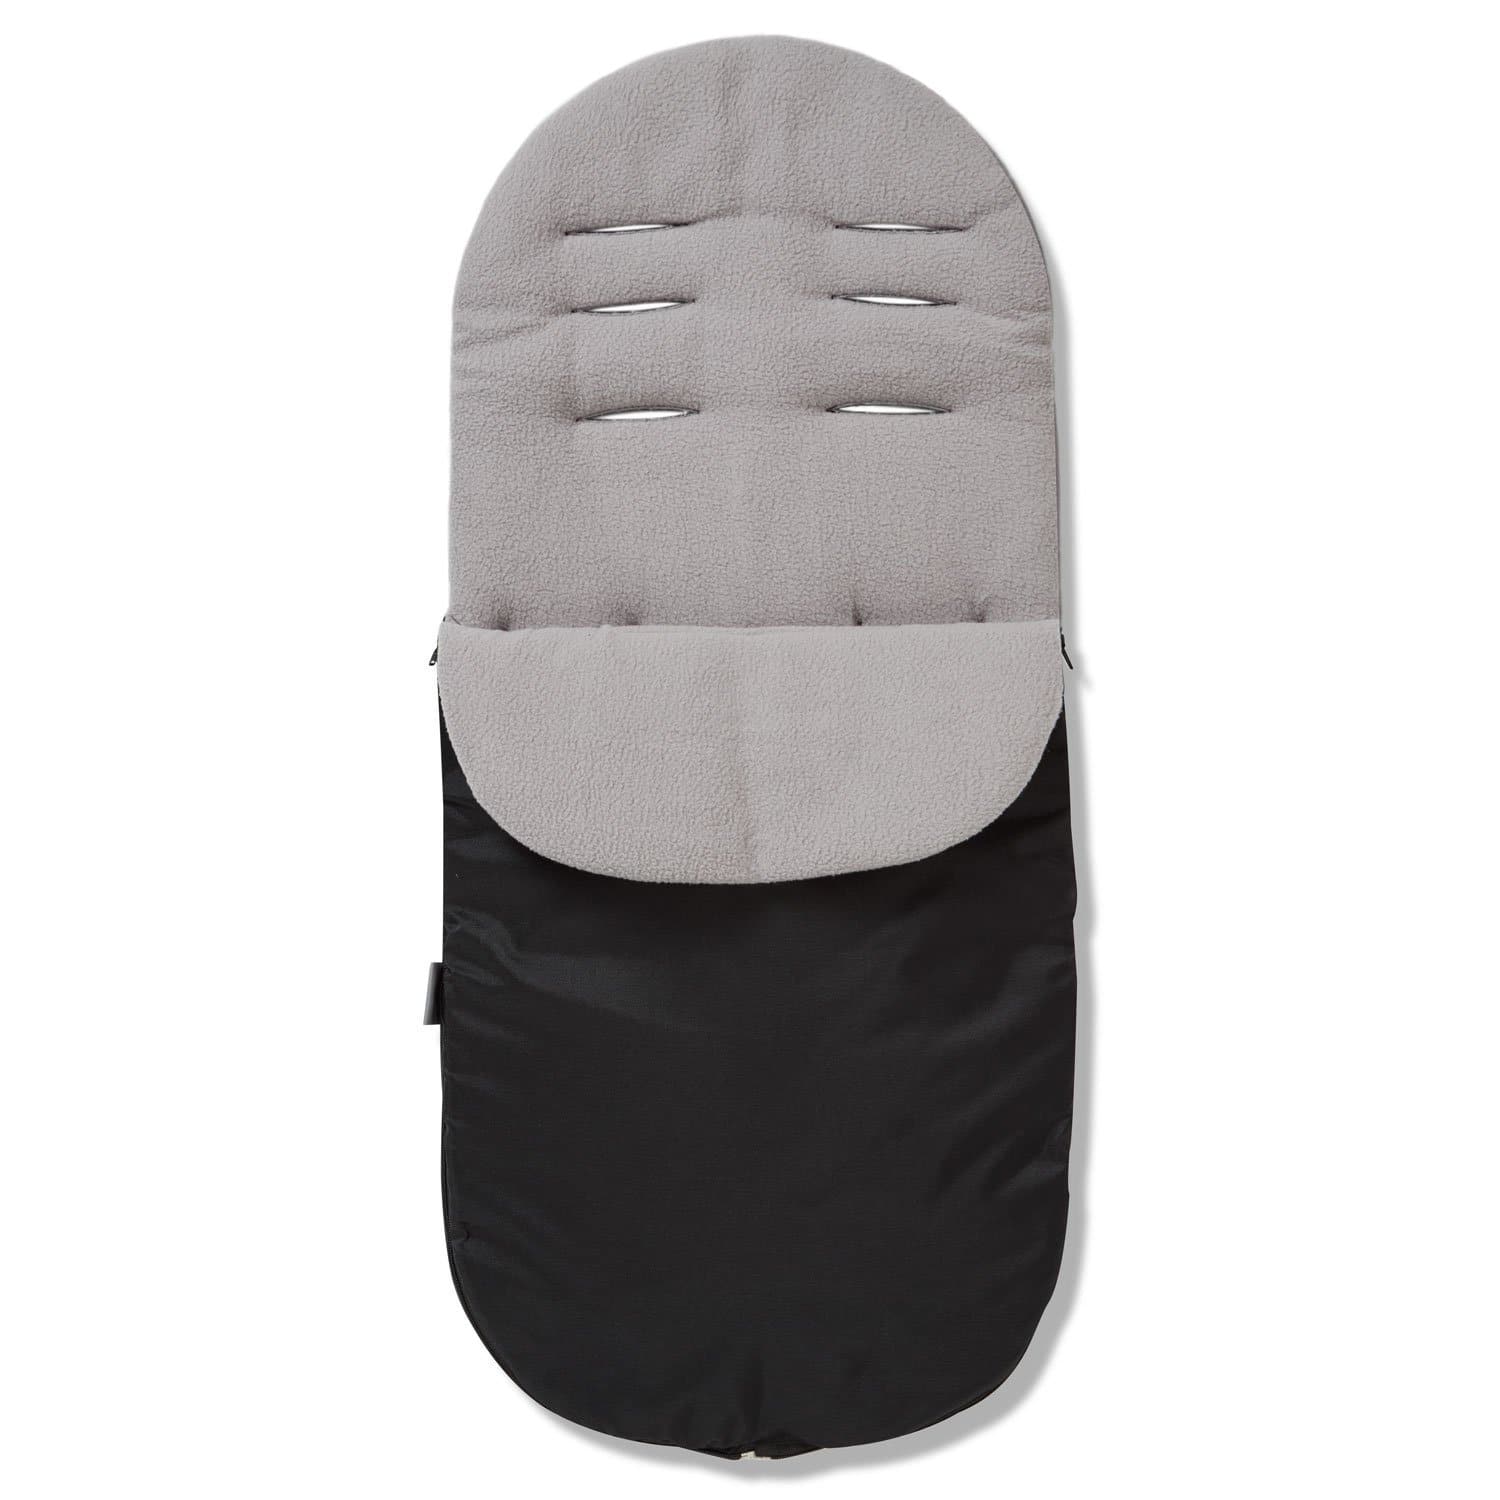 Footmuff / Cosy Toes Compatible with Concord - Grey / Fits All Models | For Your Little One